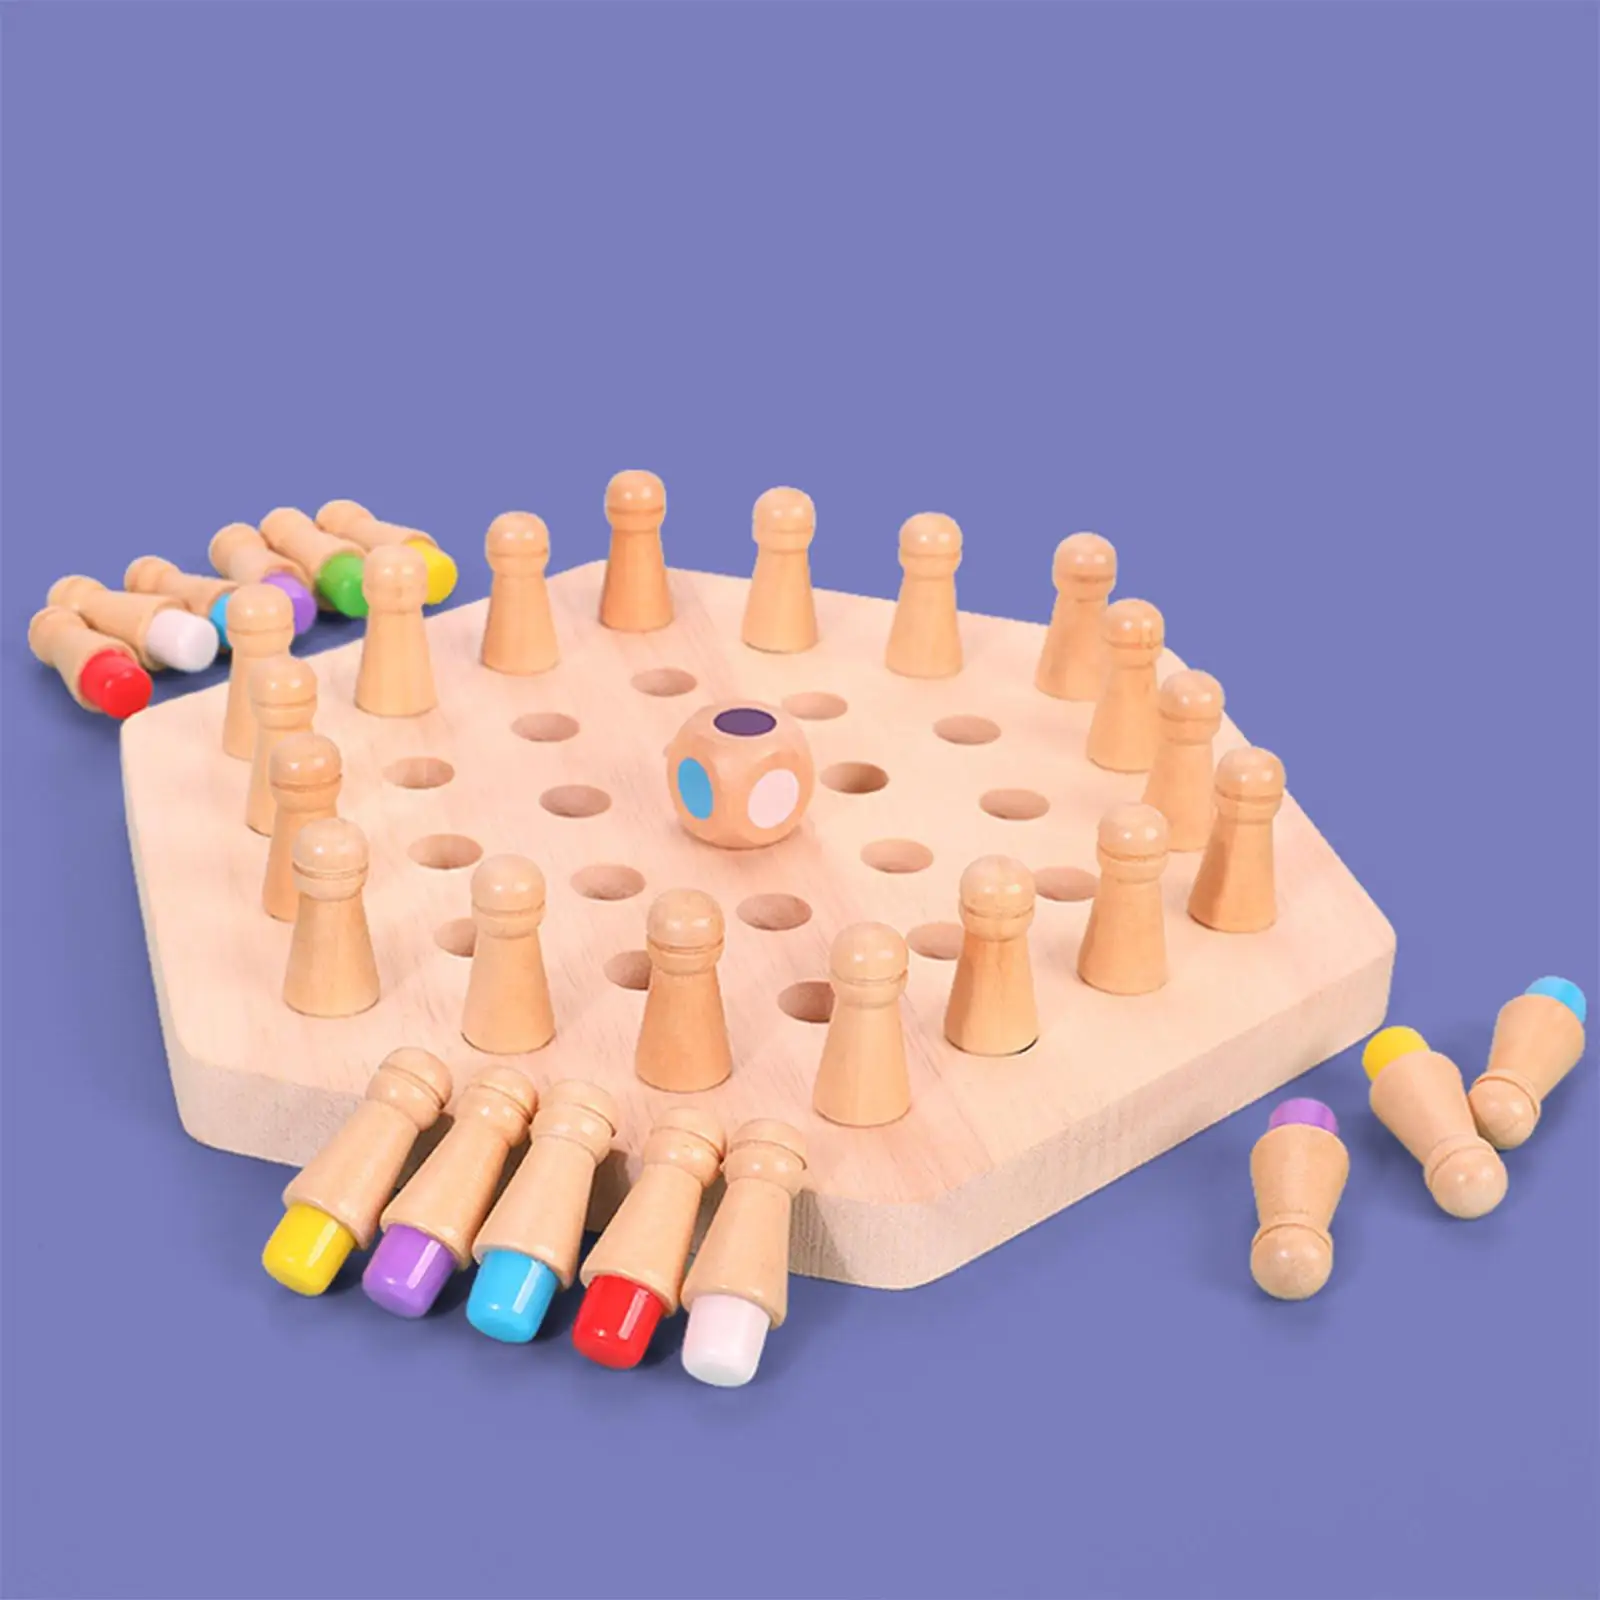 Wooden Memory Chess Game Logical Thinking Traning for Party Parent Child Desktop Board Game Development Toy